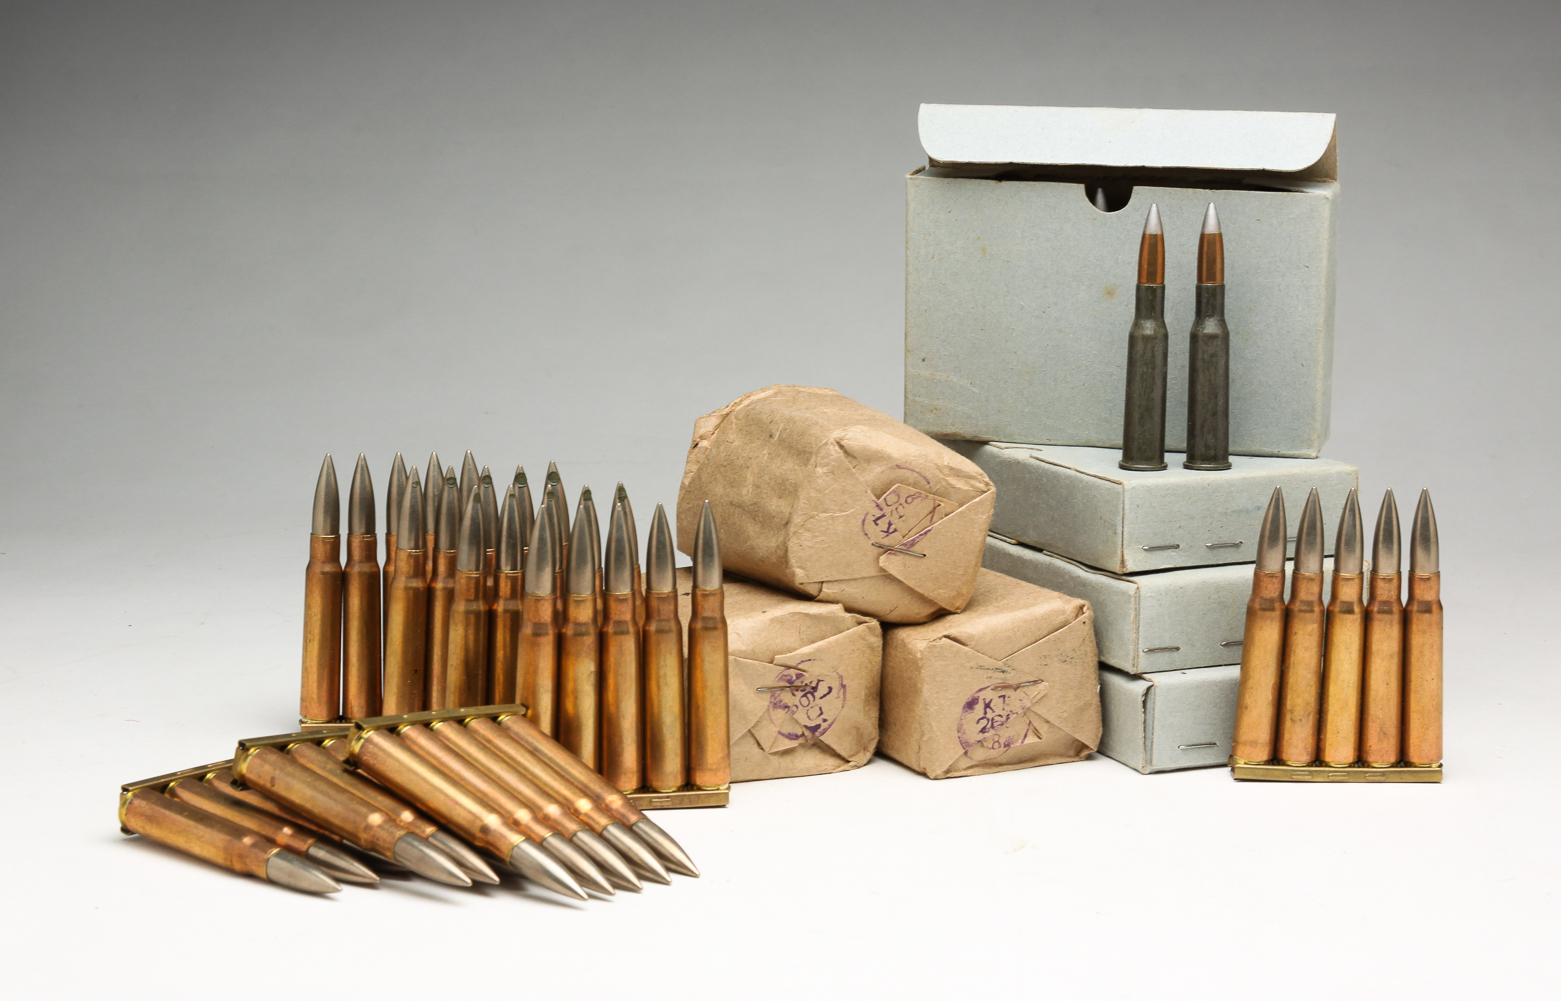 GROUP OF 180 8MM & 7.62X54R ROUNDS Group